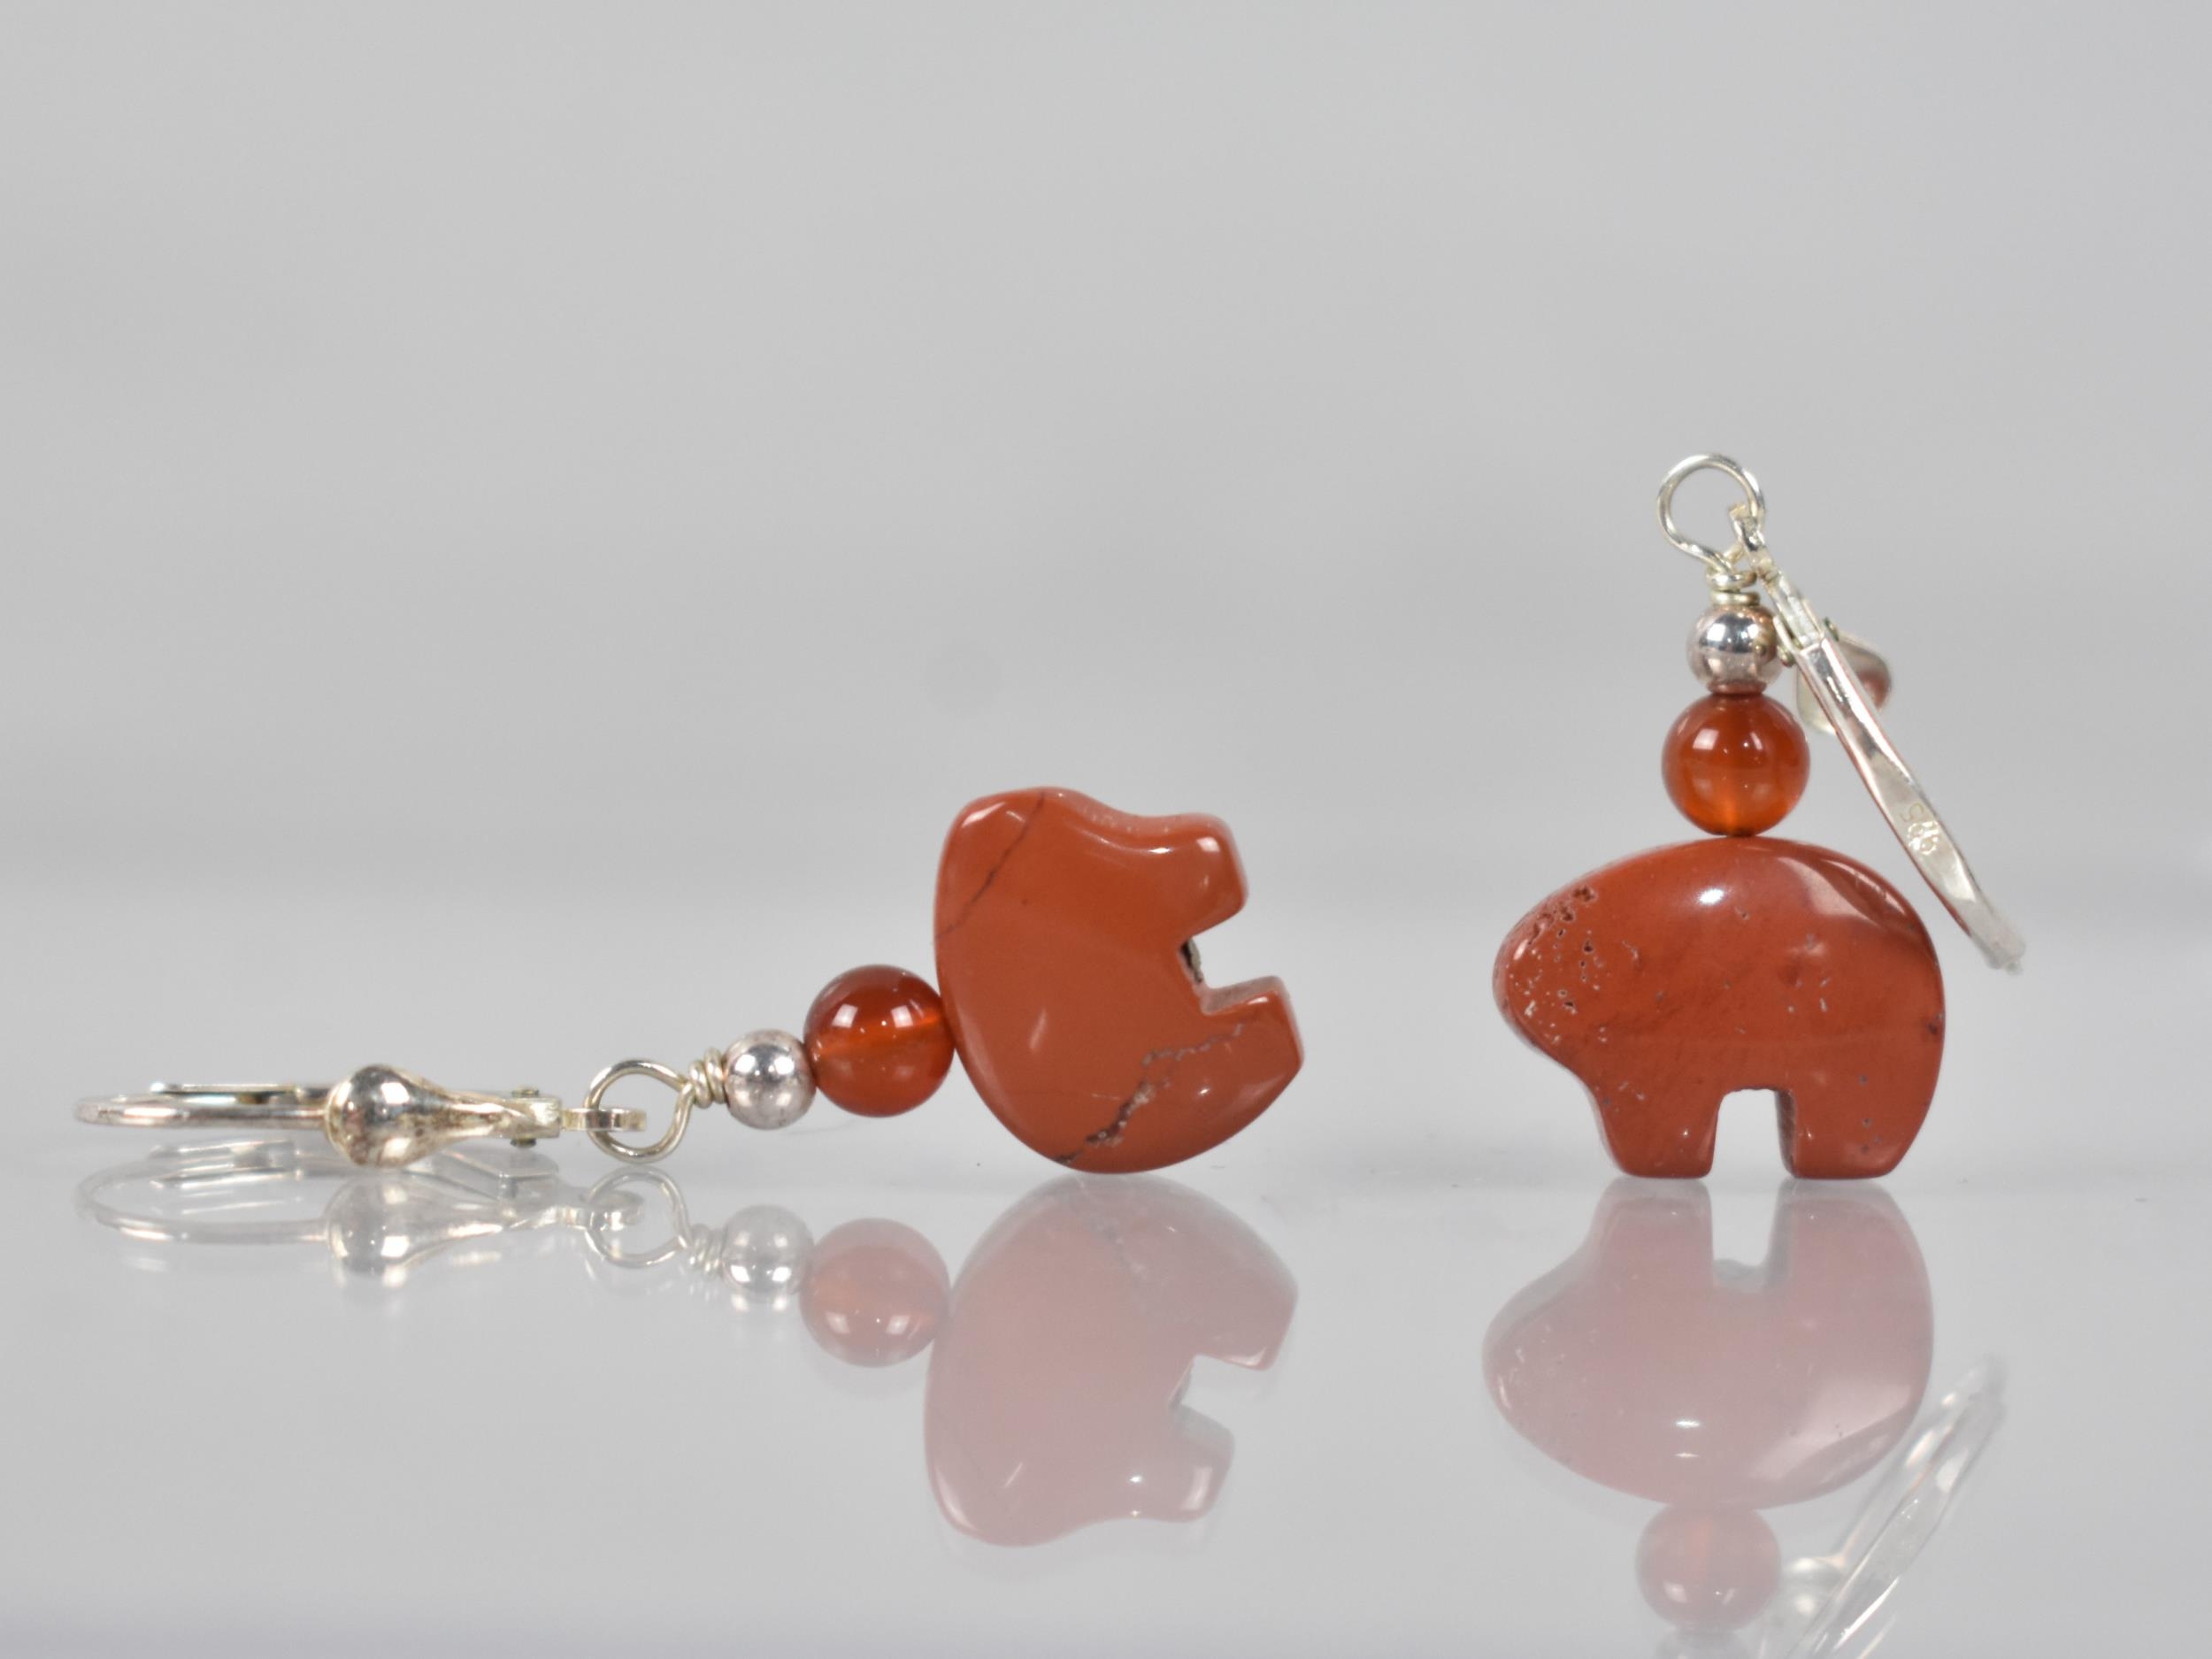 A Pair of Native American Red Jasper, Carnelian and Silver Earrings, Drops in the Form of a Bears,